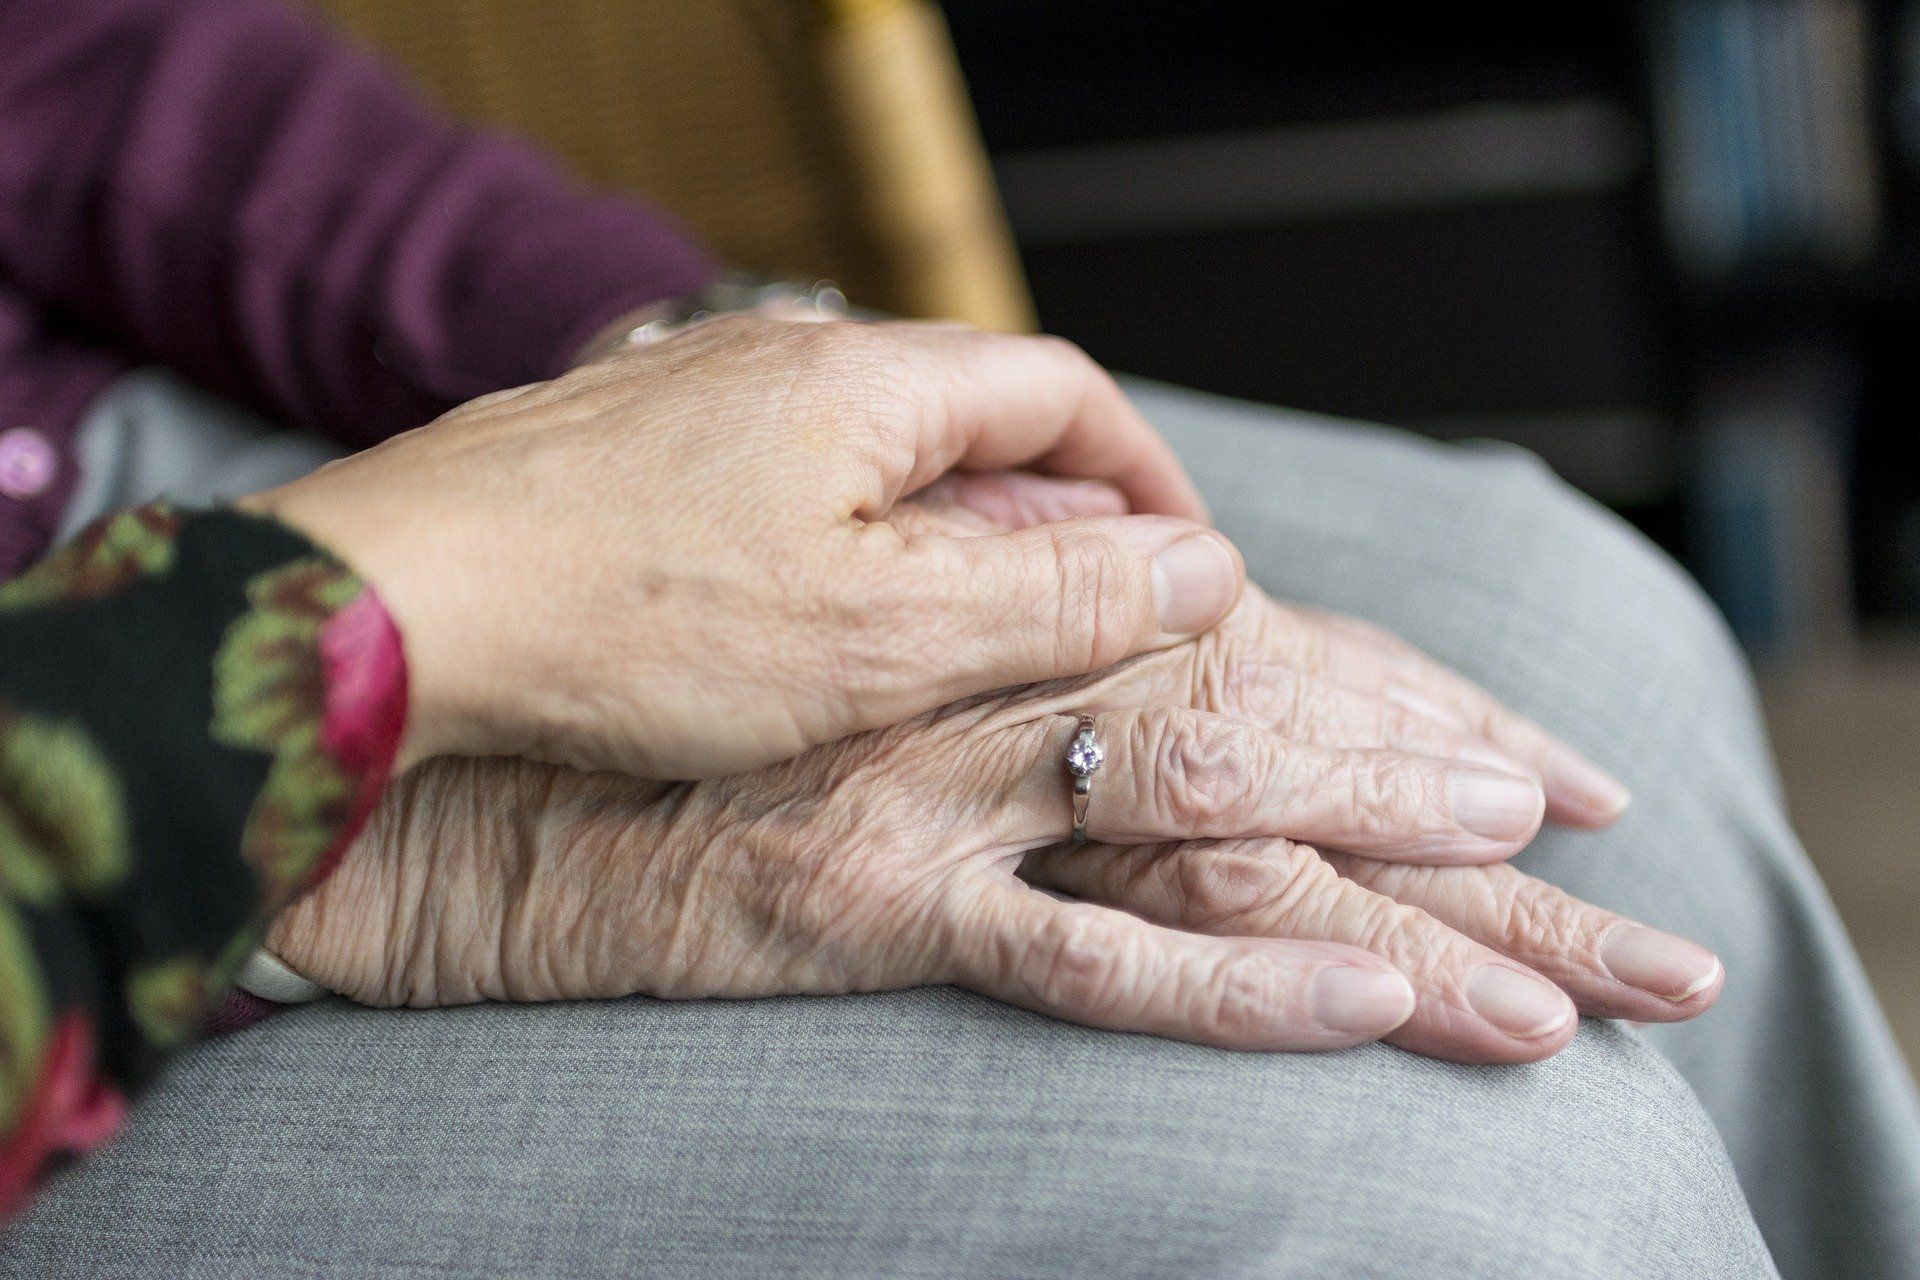 Younger hand rests atop and brings comfort to elderly hands.